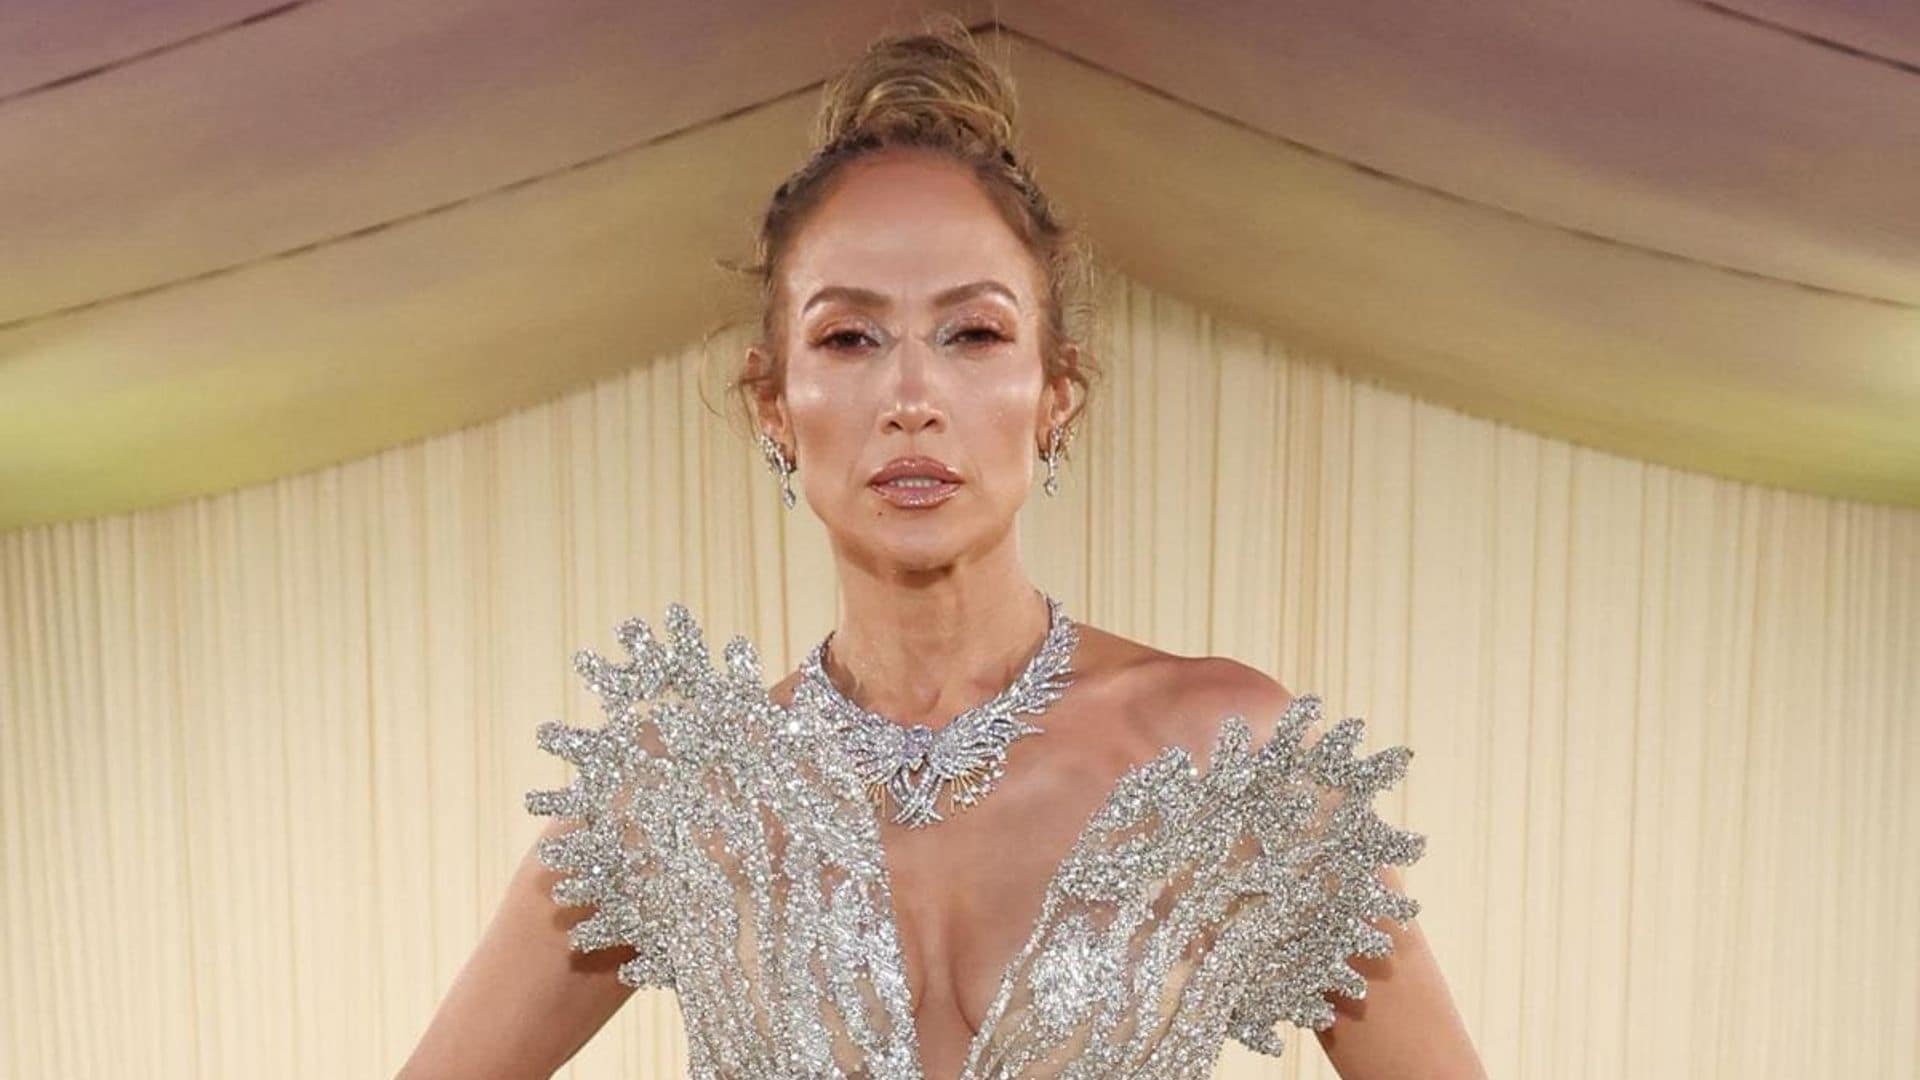 Jennifer Lopez shines in Maison Schiaparelli gown adorned with 2.5 million crystals at Met Gala